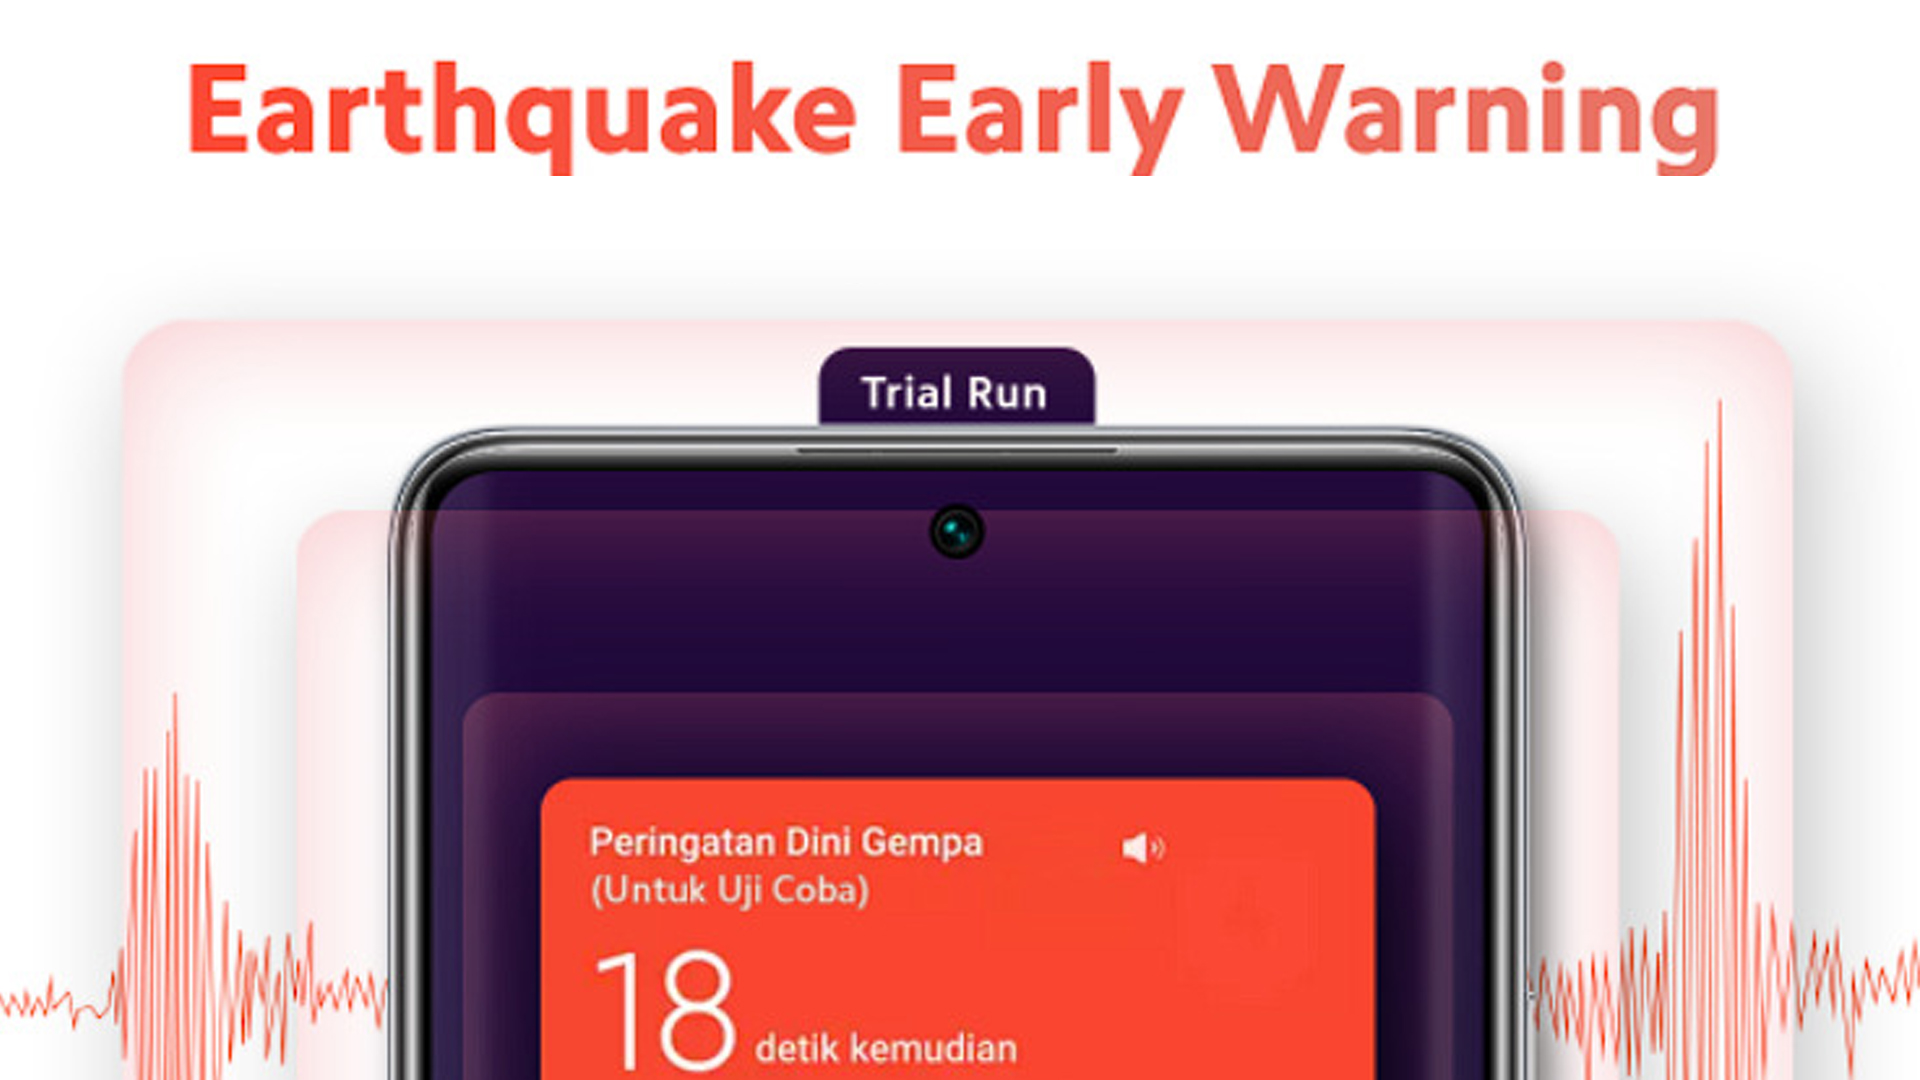 Earthquake Early Warning feature rolling out to Xiaomi devices in Indonesia